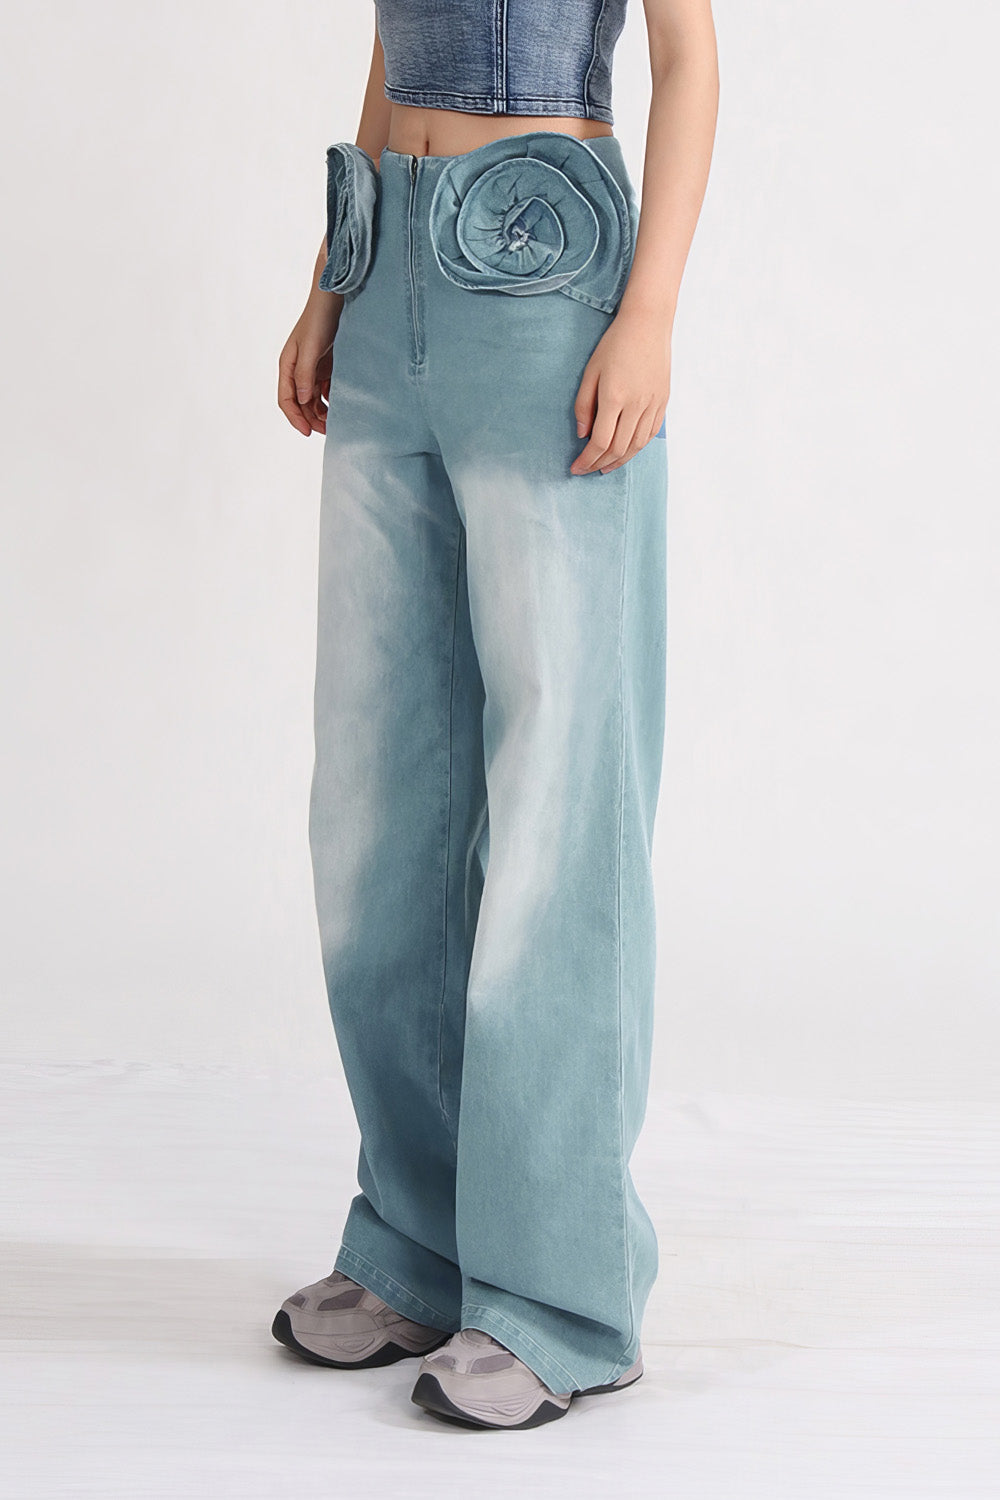 High Waisted Jeans with Flowers Attached - Blue